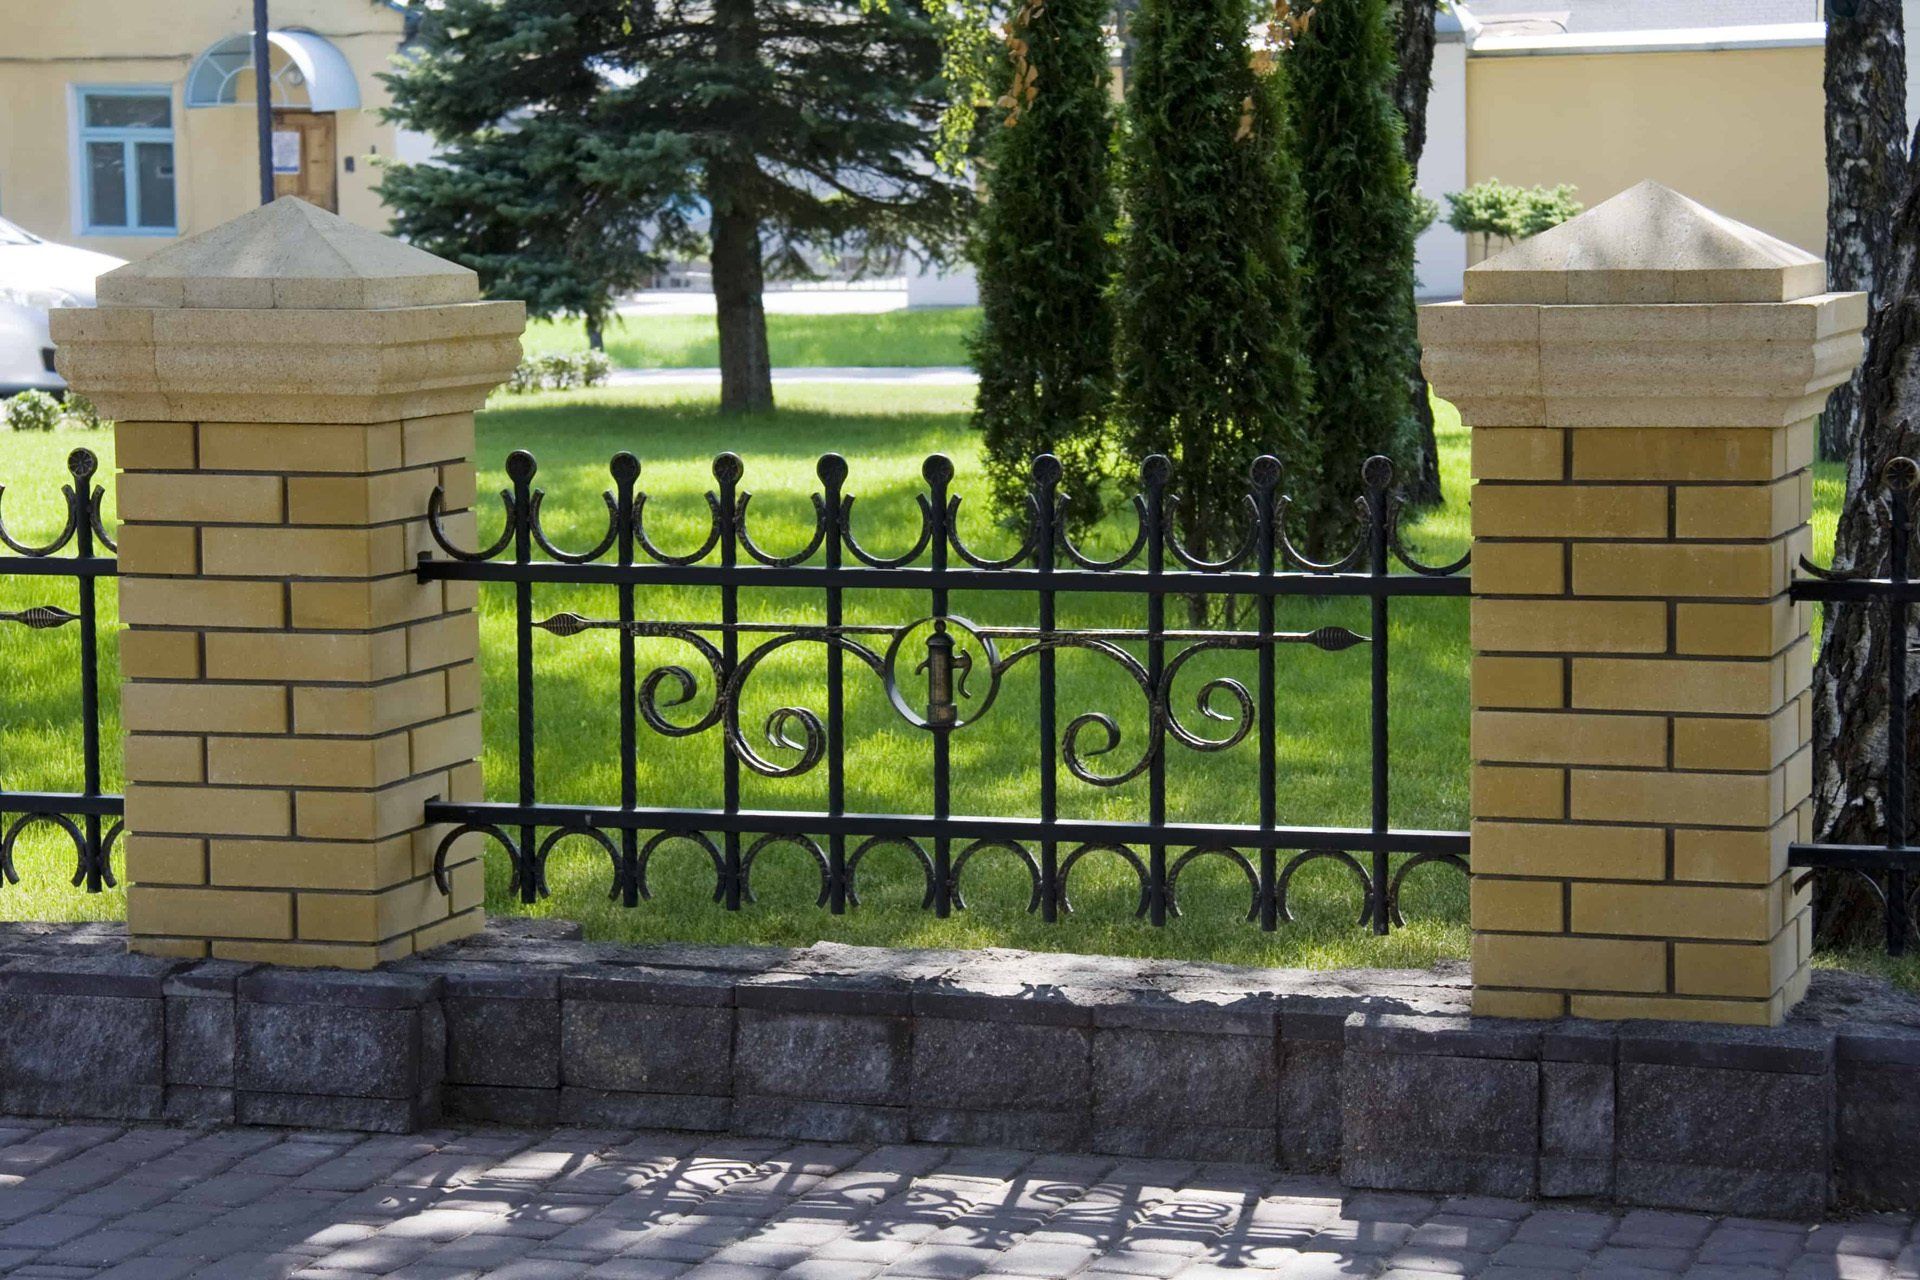 Wrought iron fence is the toughest fencing material